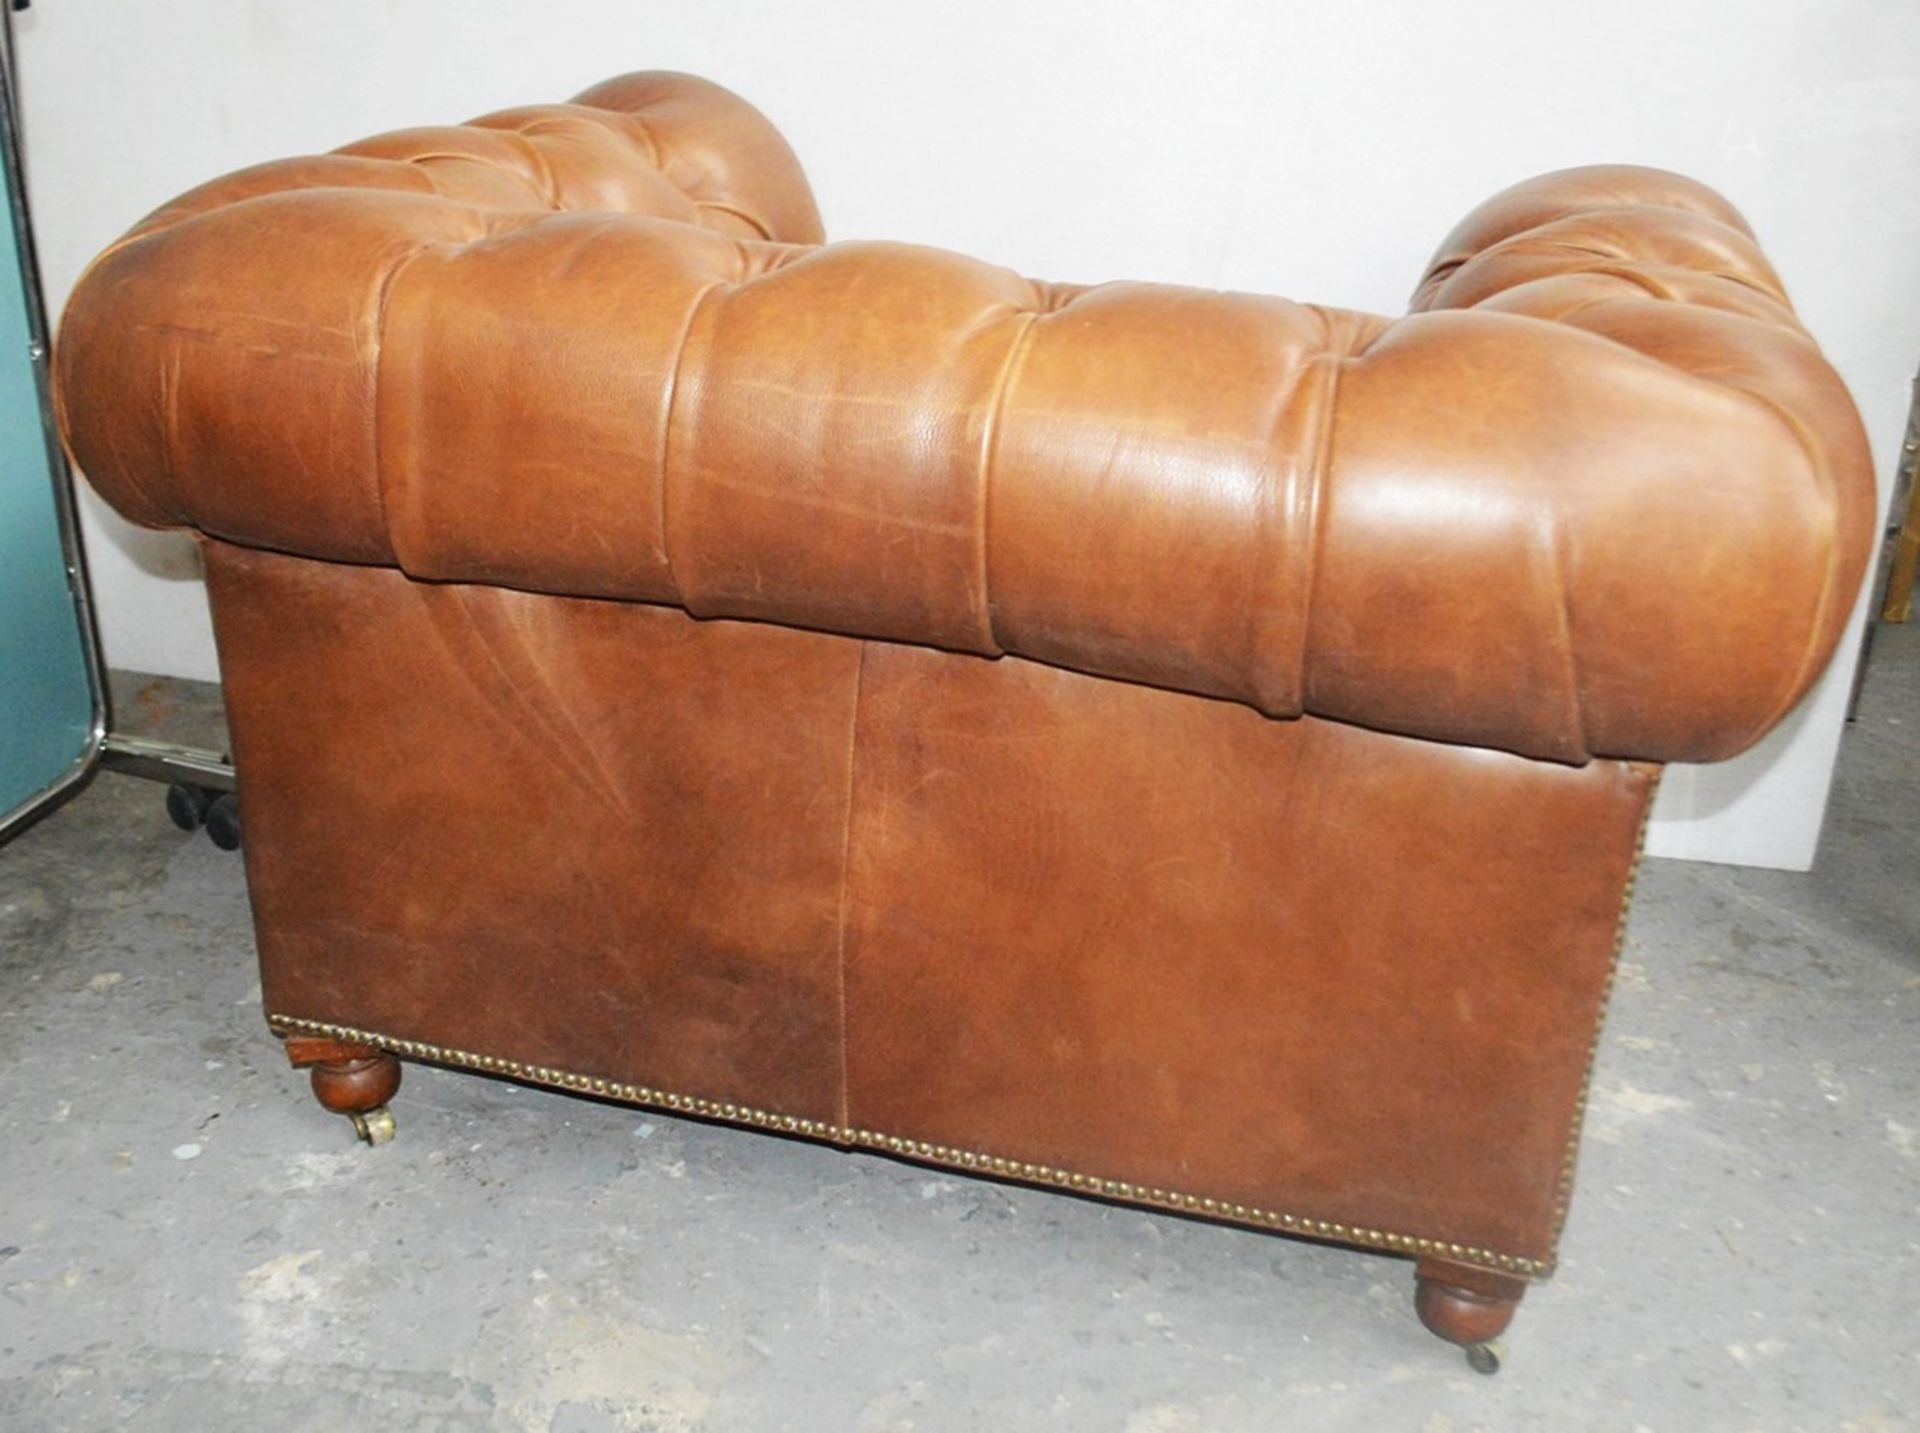 1 x Vintage-style Large Leather Chesterfield Armchair Featuring A Distressed Finish - Image 5 of 6